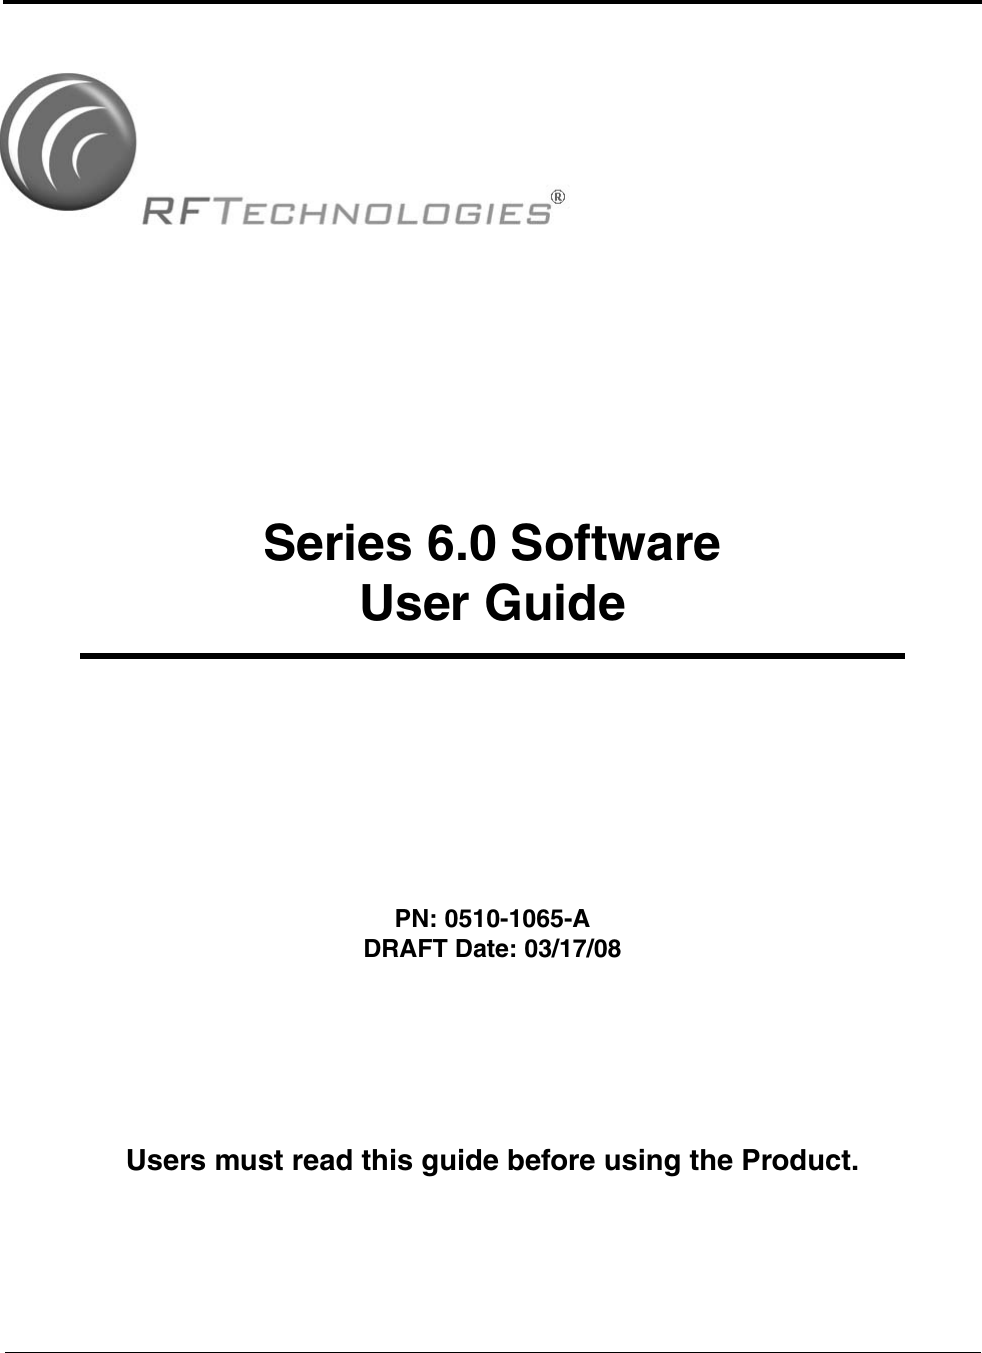 Series 6.0 SoftwareUser Guide PN: 0510-1065-ADRAFT Date: 03/17/08Users must read this guide before using the Product.